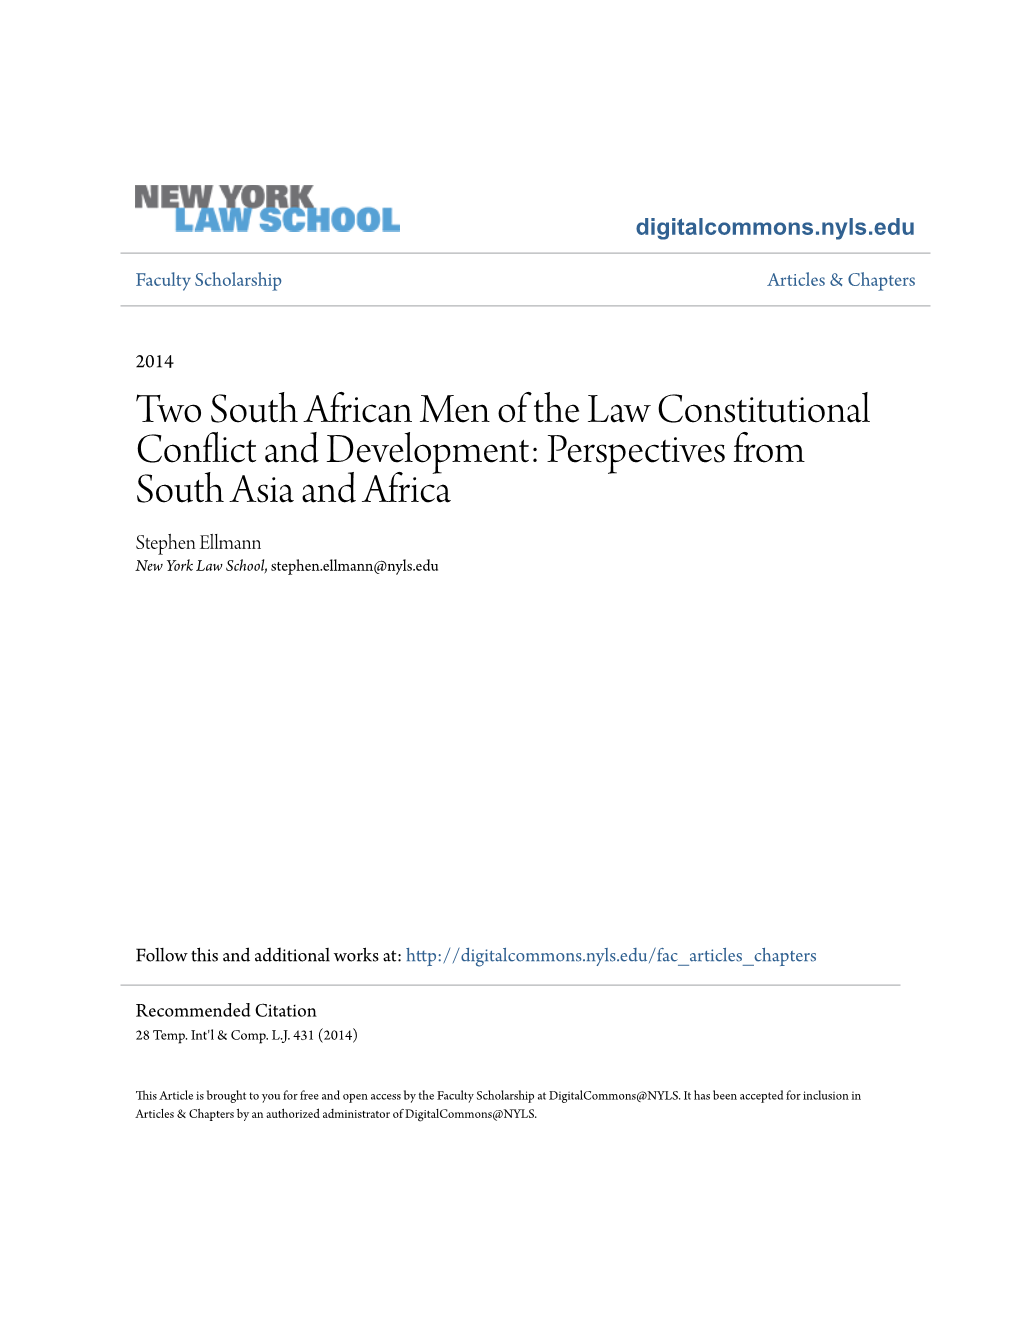 Two South African Men of the Law Constitutional Conflict and Development